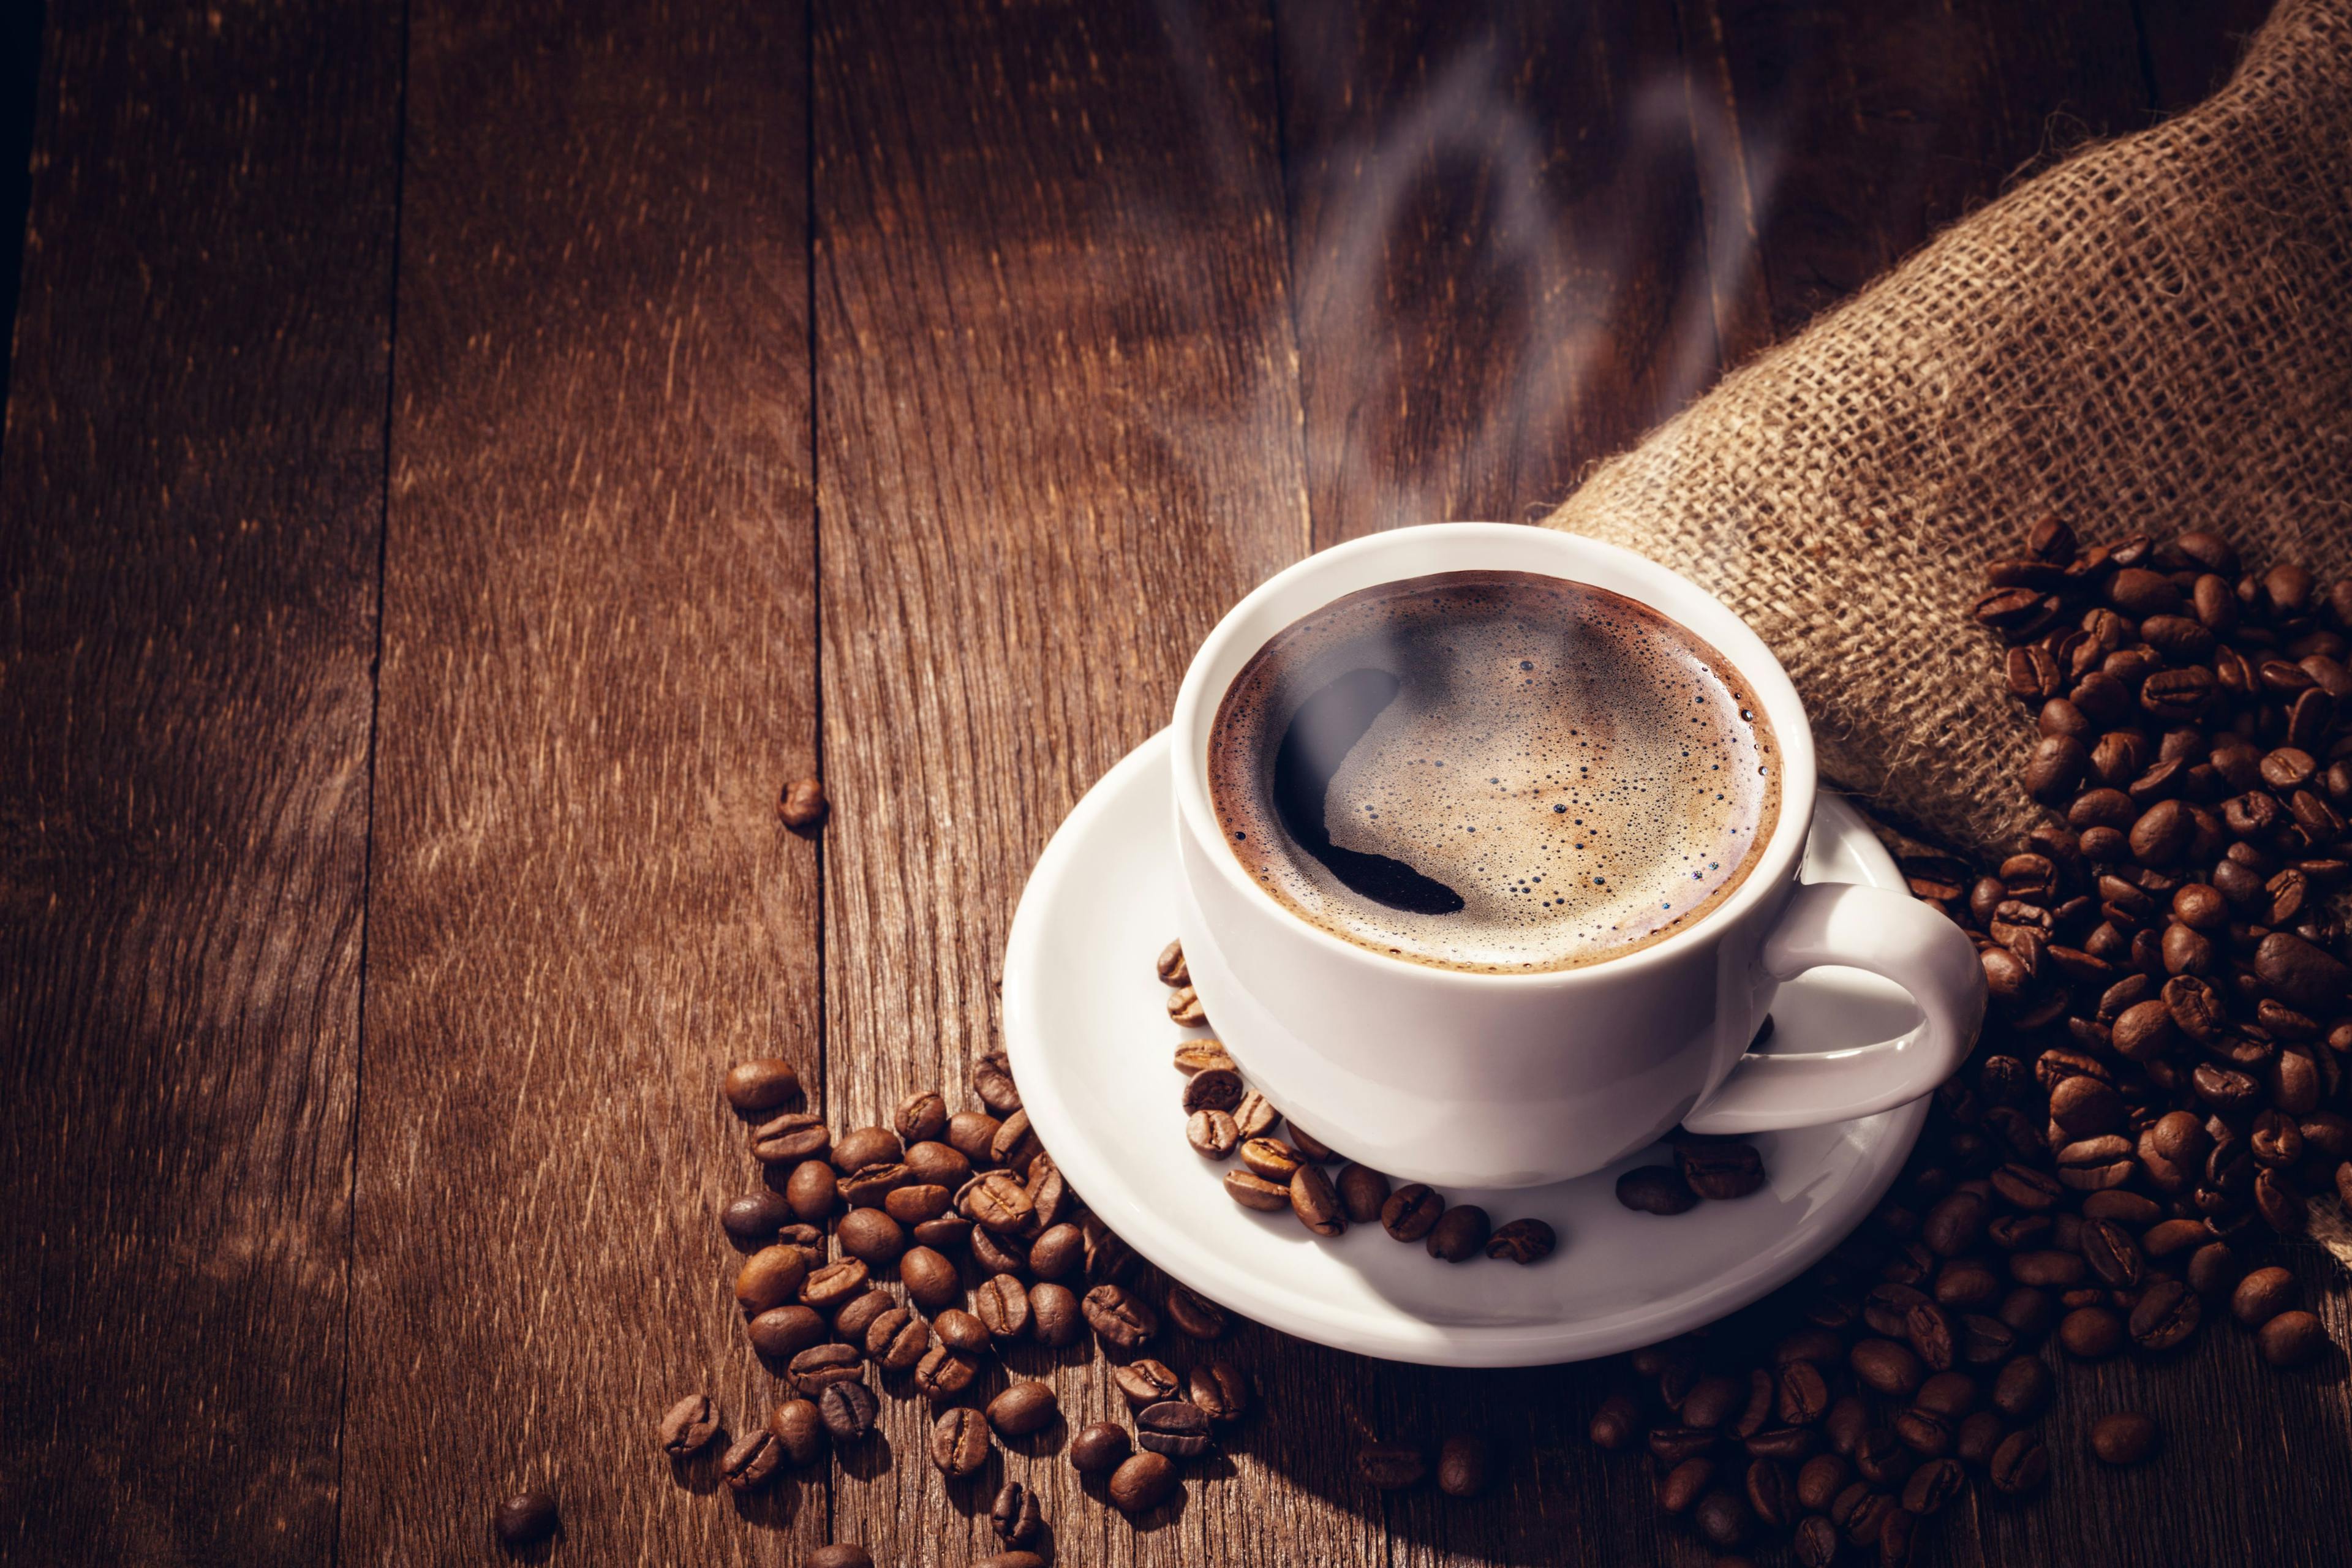 Hot Cup of Coffee | image credit: dimakp - stock.adobe.com